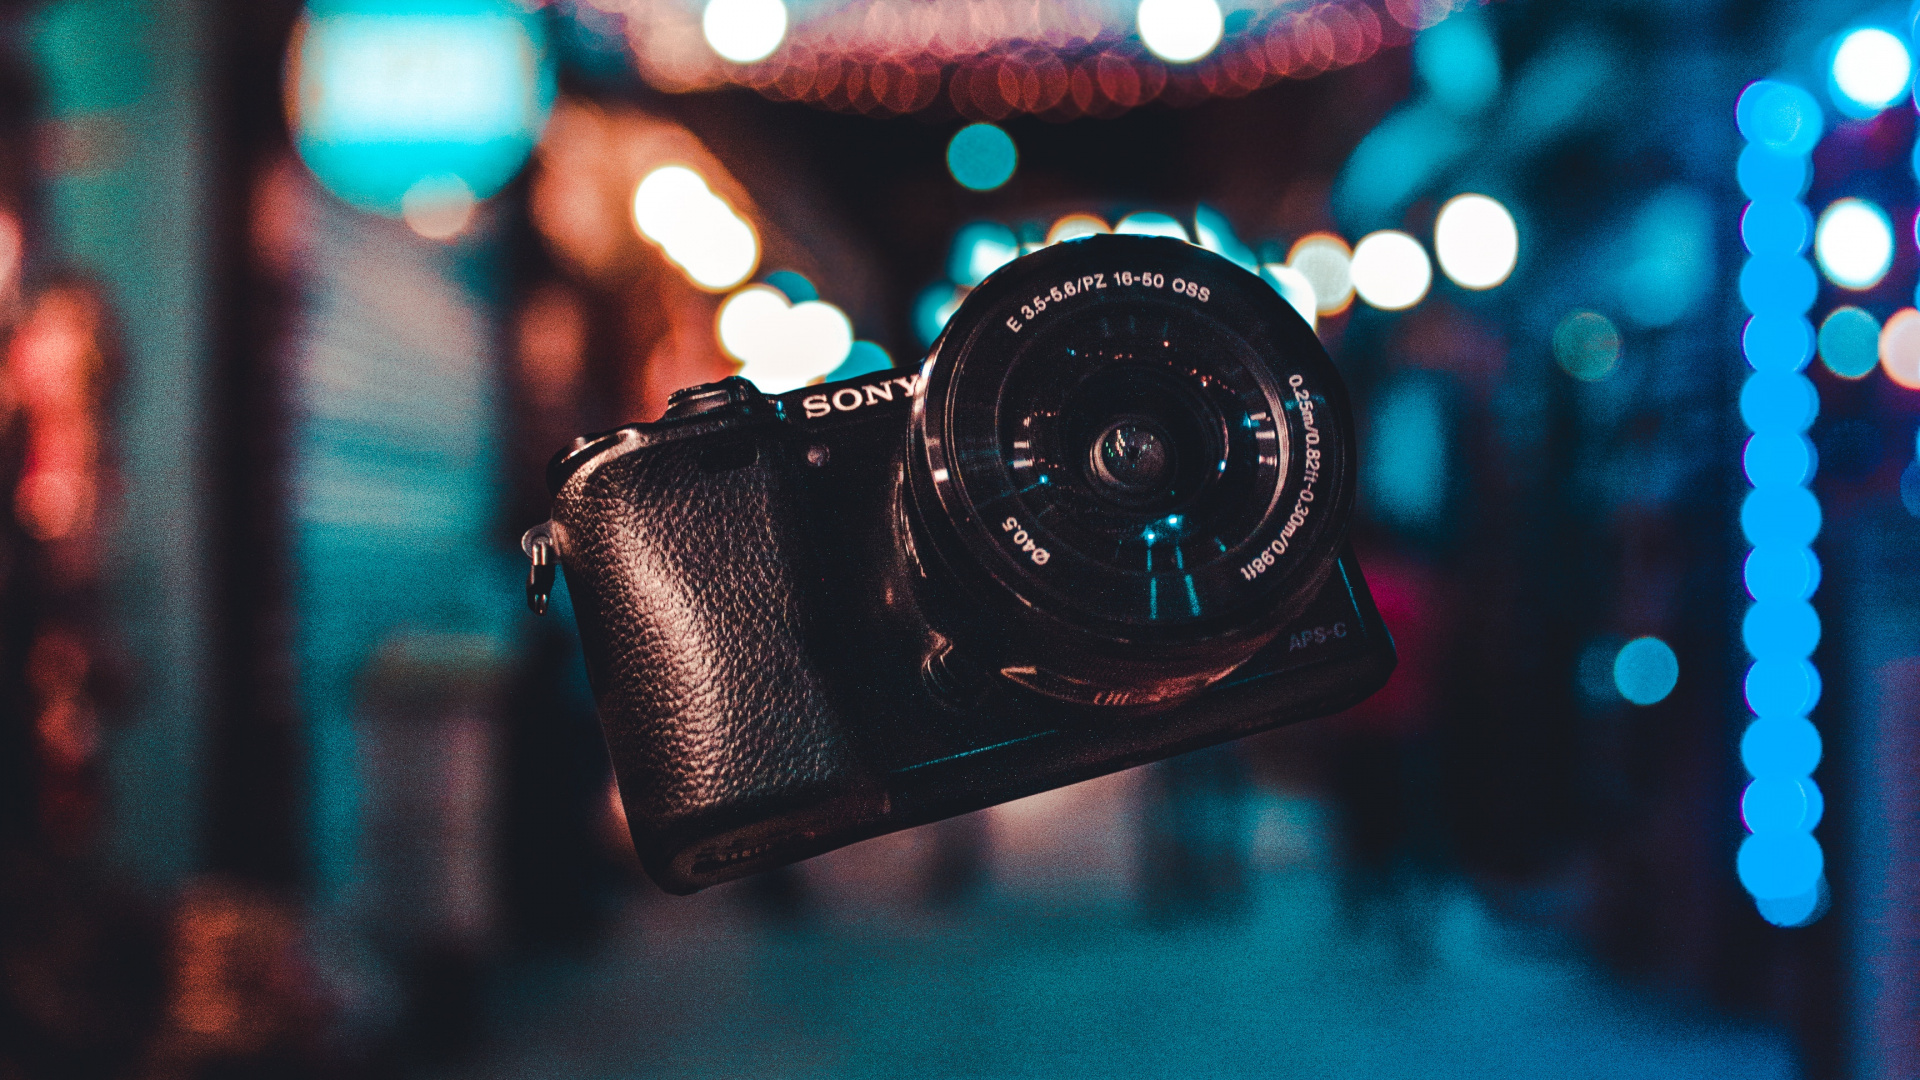 Black Dslr Camera on Blue and White String Lights. Wallpaper in 1920x1080 Resolution